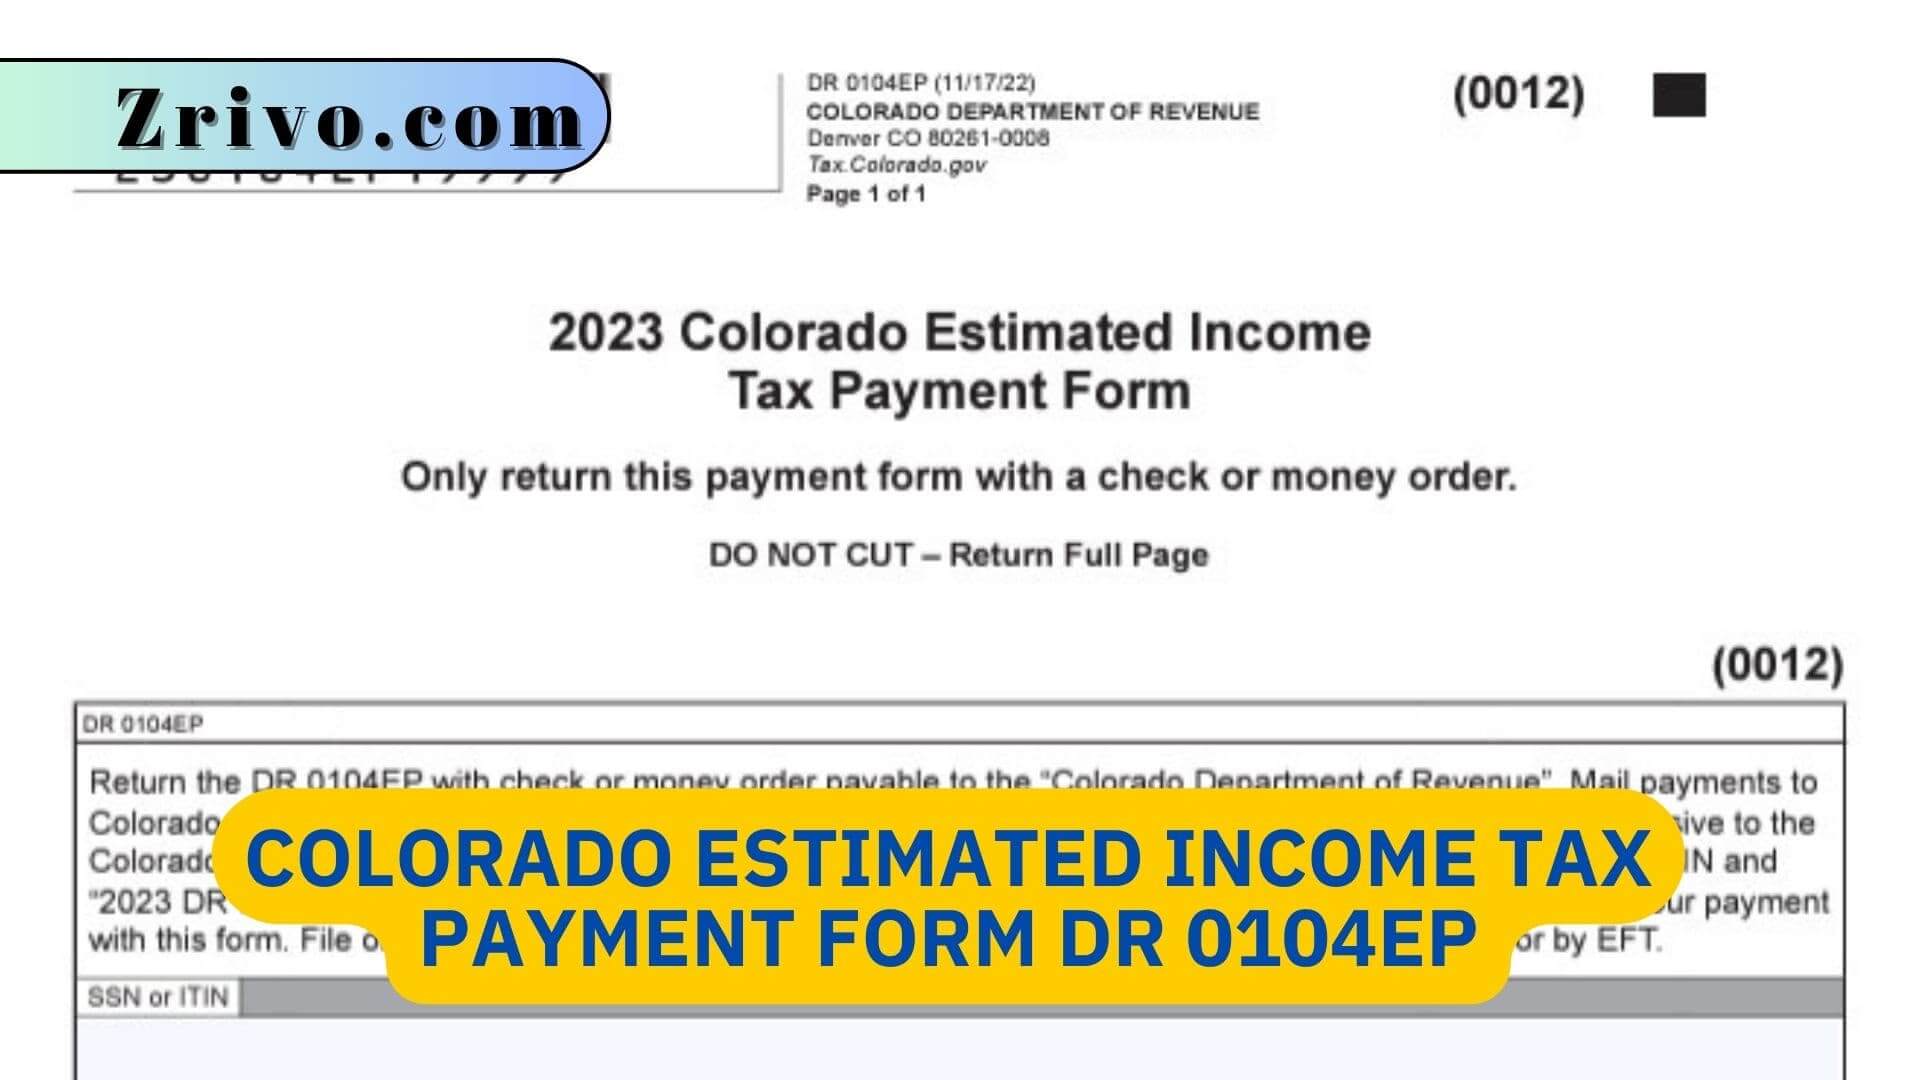 Colorado Estimated Income Tax Payment Form DR 0104EP